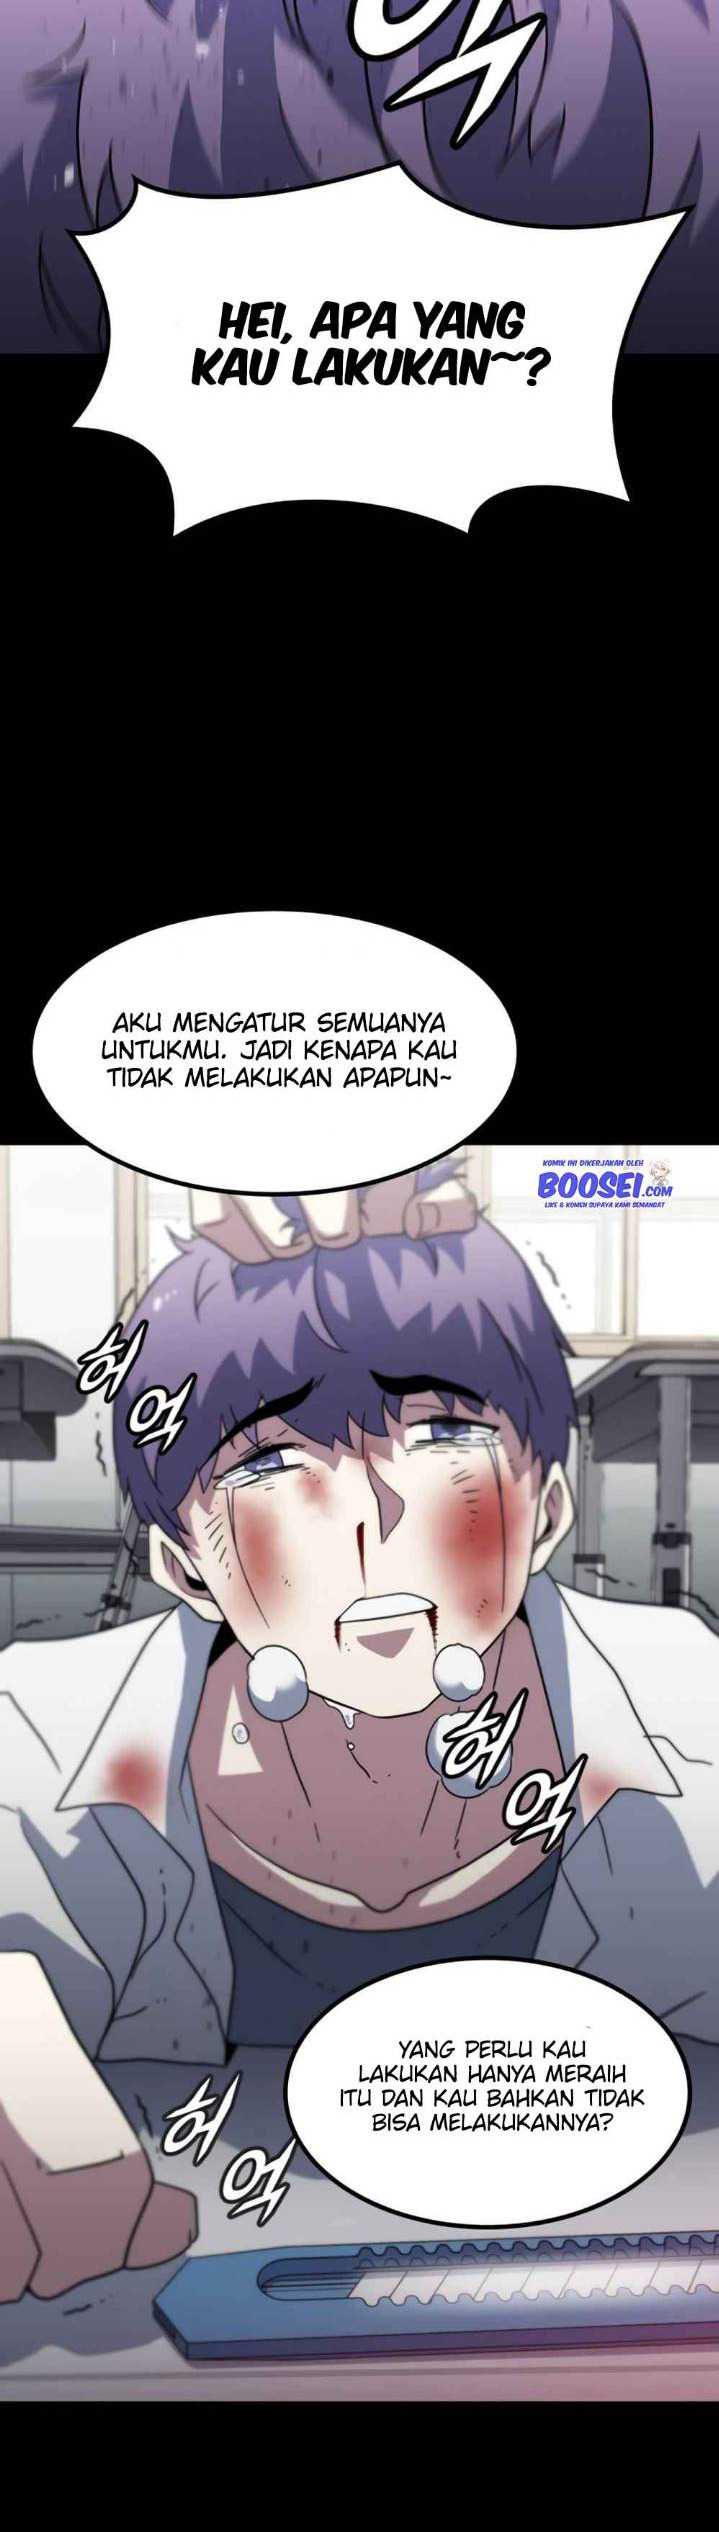 Hitpoint Chapter 8